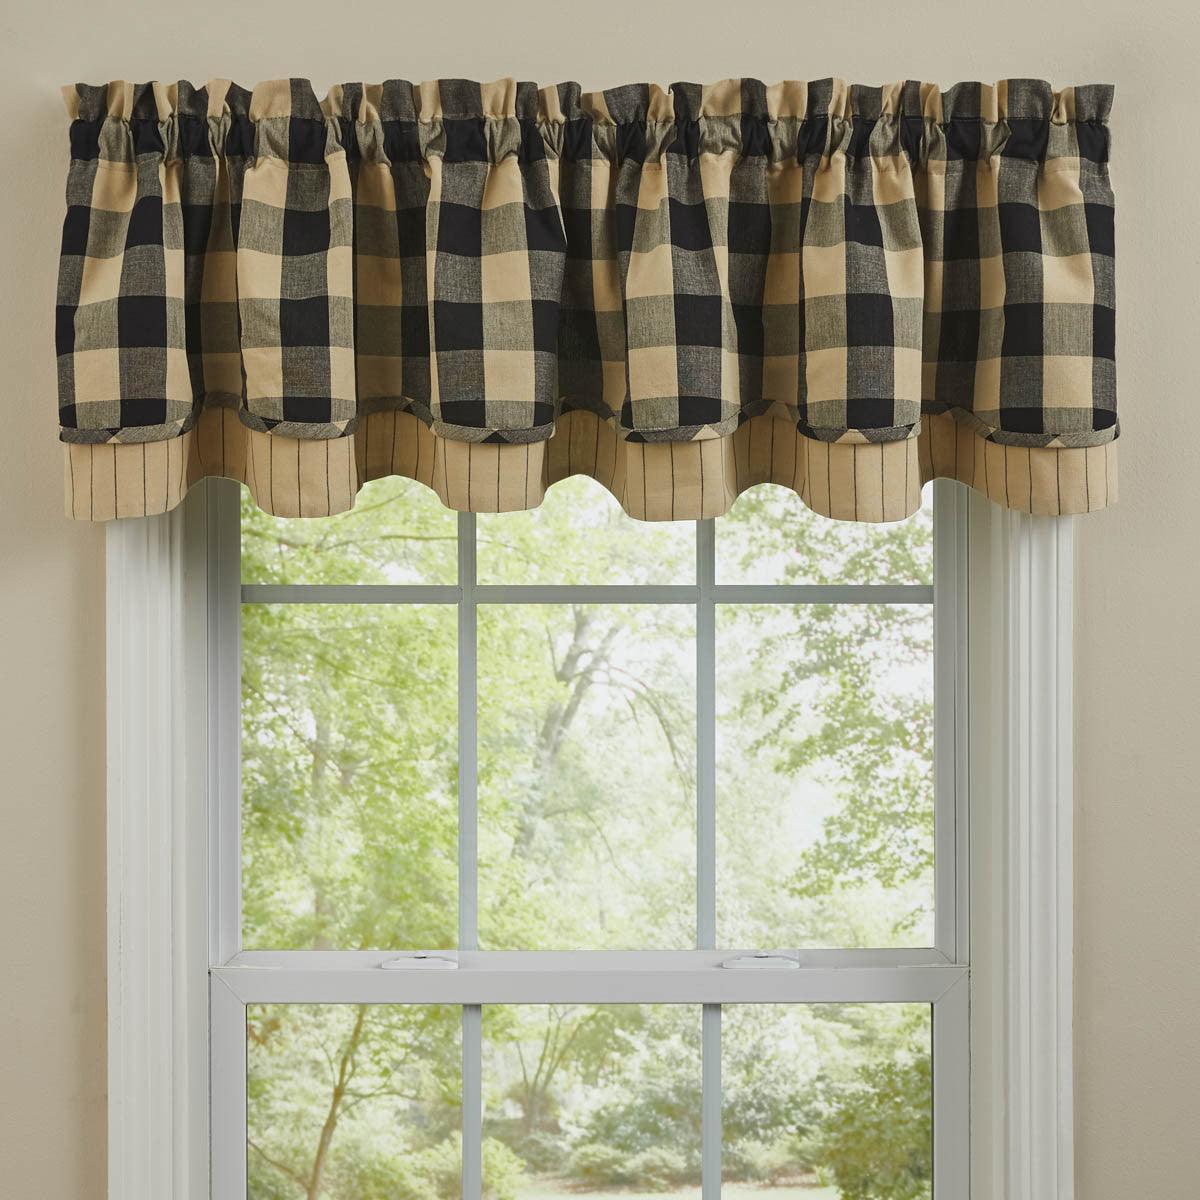 Wicklow Check Valance - Lined Layered Black Park Designs - The Fox Decor